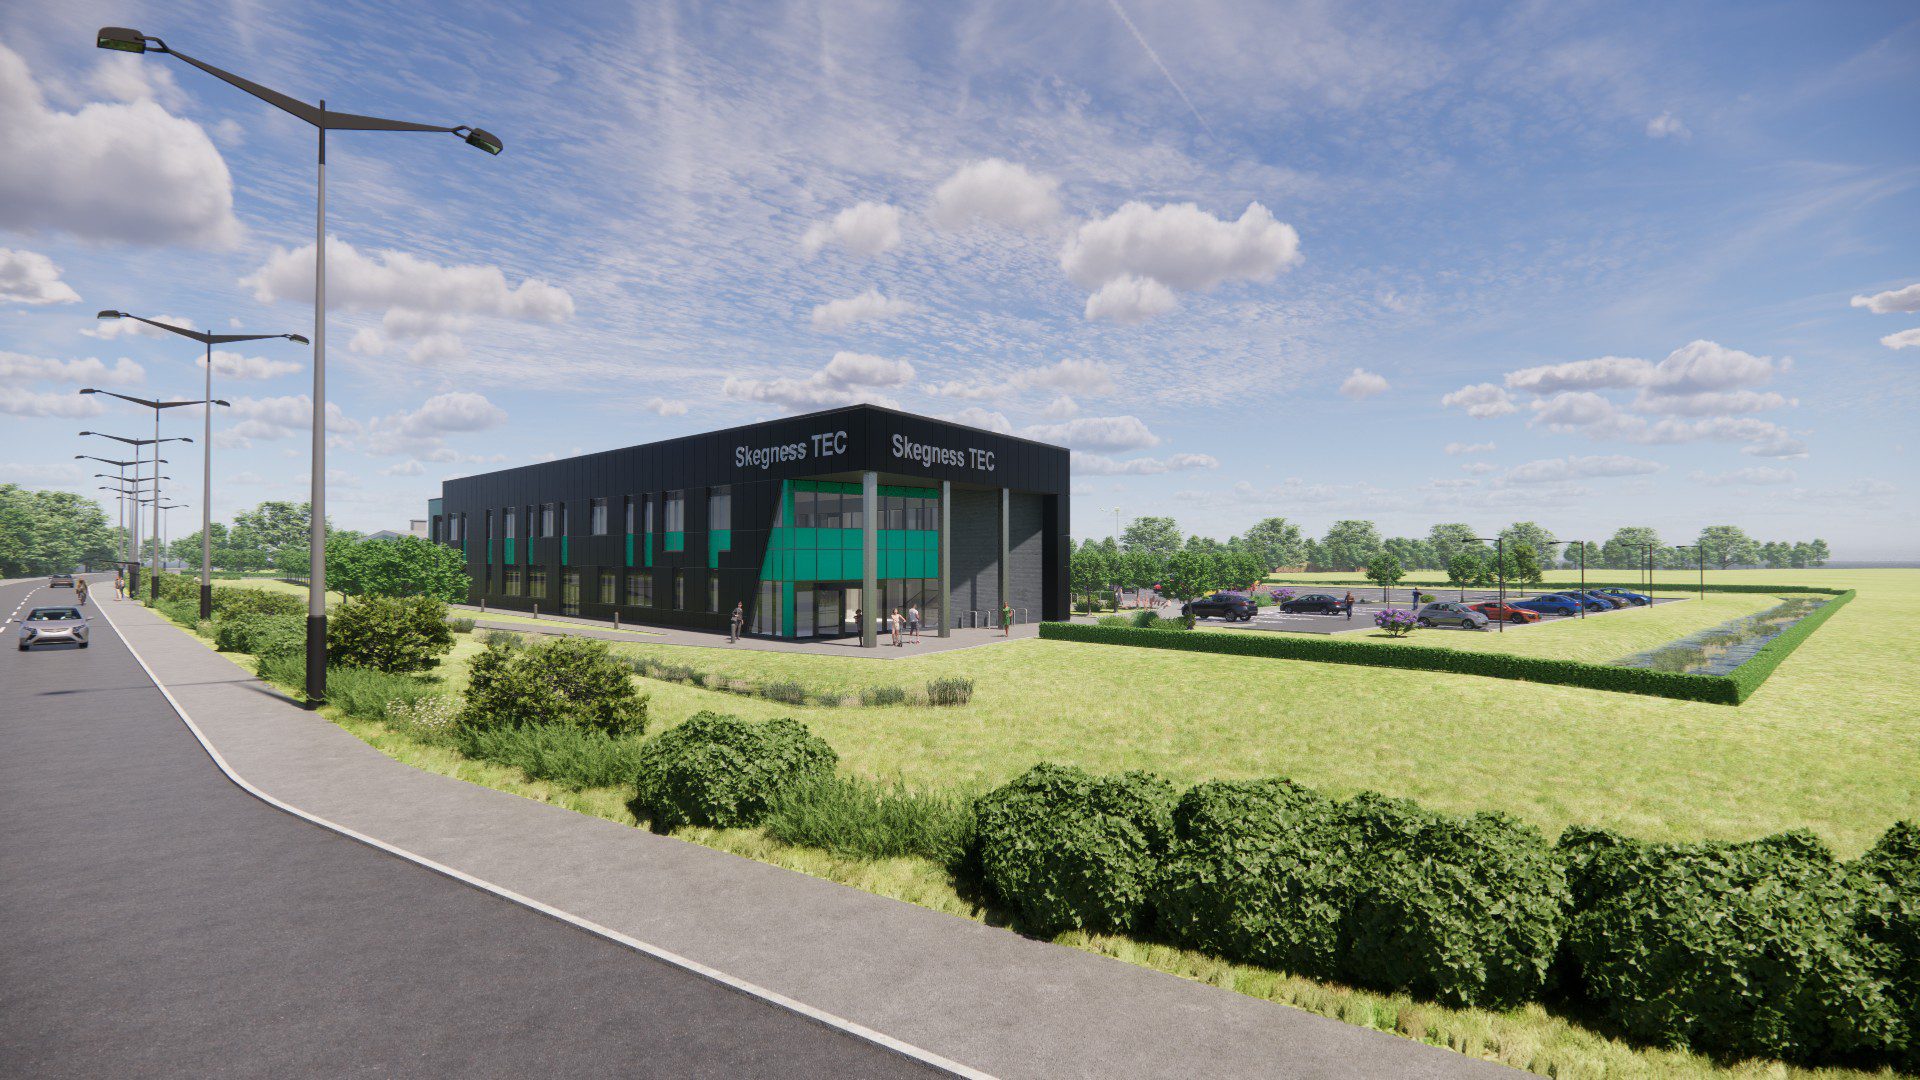 Construction is underway for a New Further and Higher Education Campus in Skegness